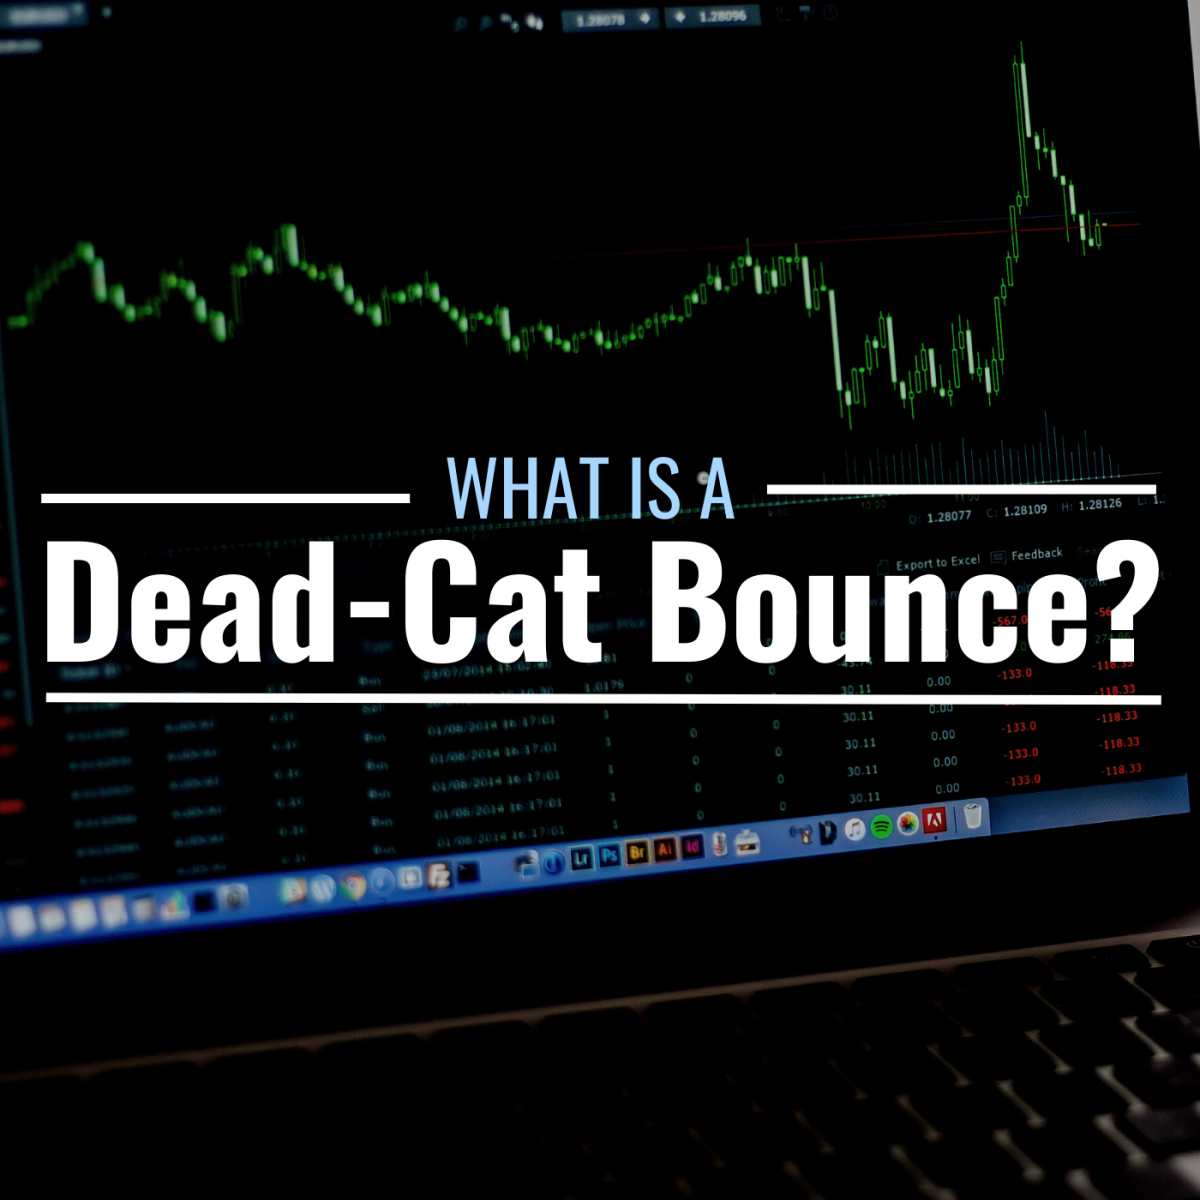 Photo of a computer screen showing a graph with text overlay that reads "What Is a Dead-Cat Bounce?"